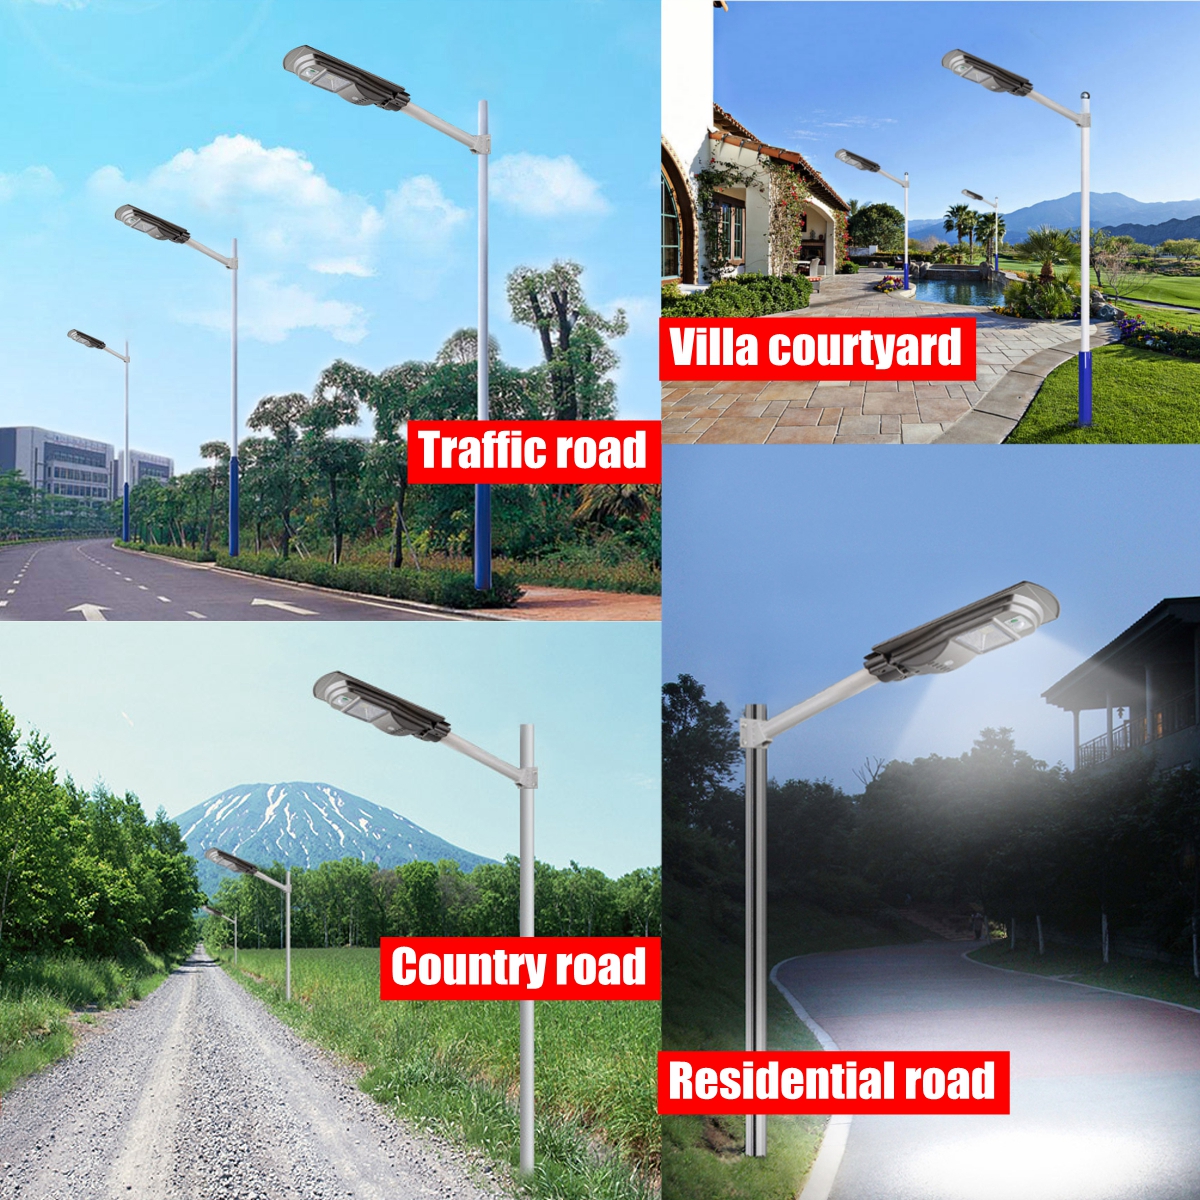 117234351-LED-Solar-Wall-Street-Light-PIR-Motion-Sensor-Outdoor-Lamp-with-Remote-Controller-1694433-10